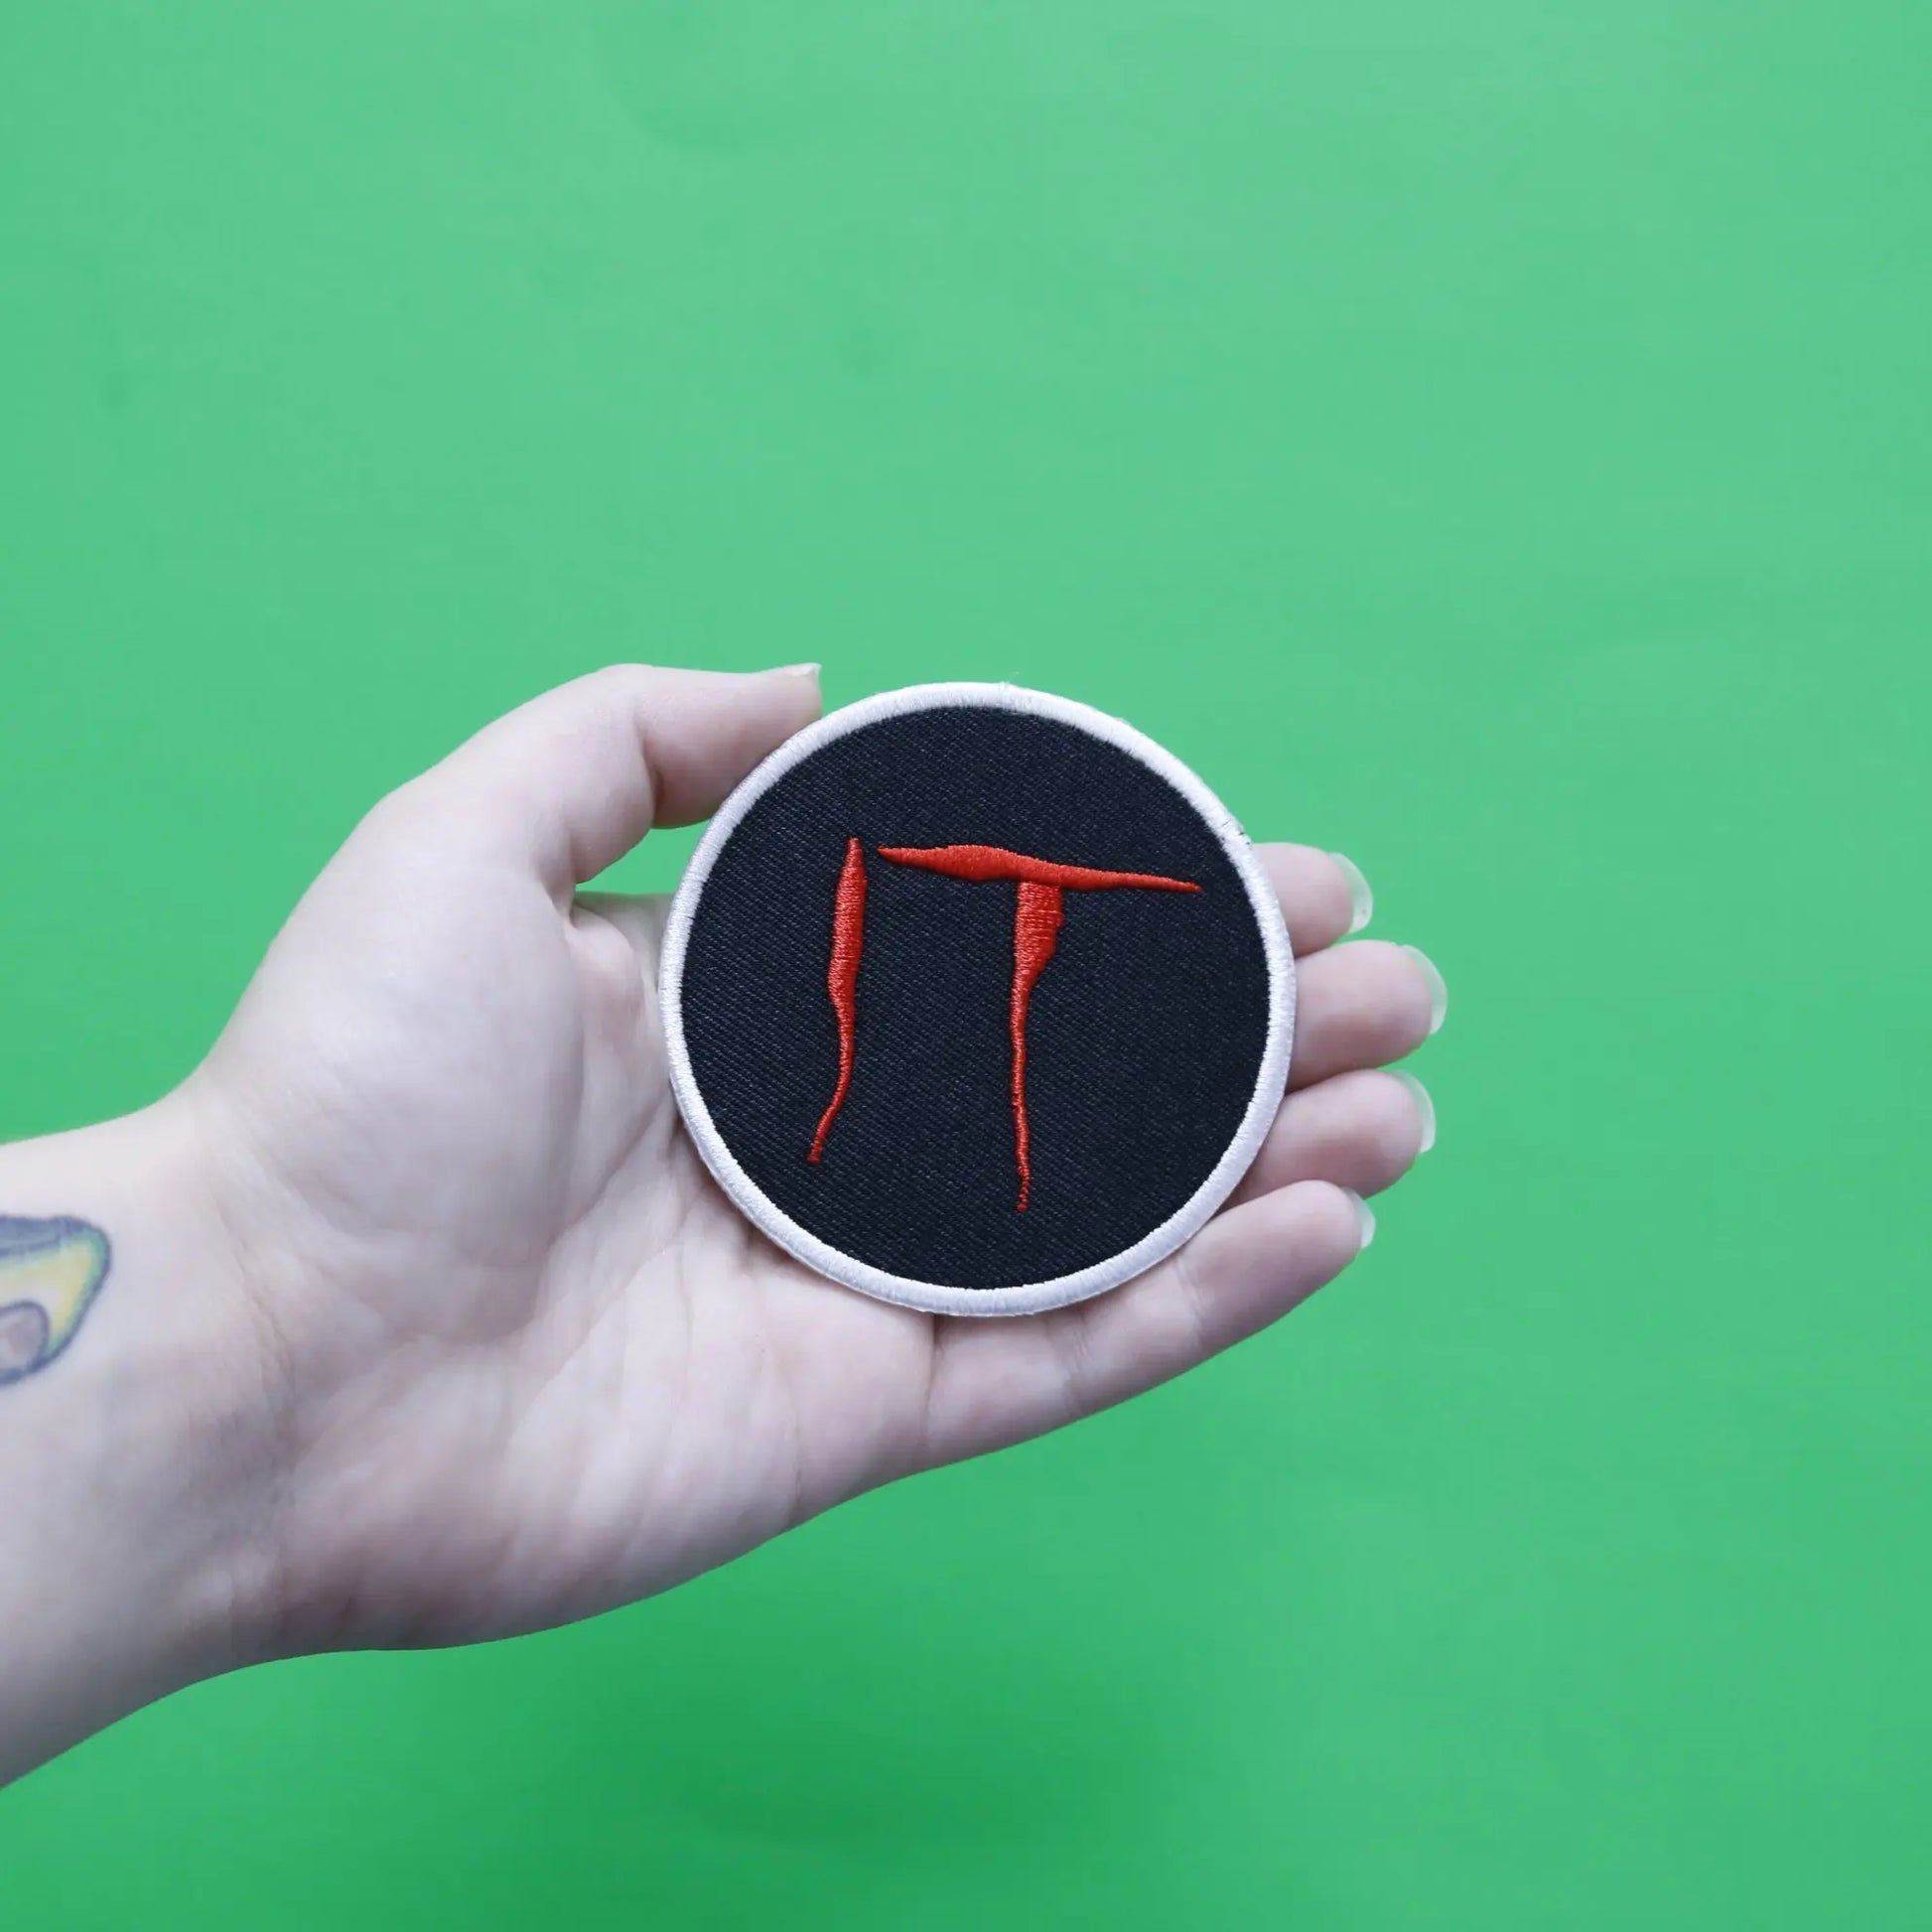 Official "IT" Round Embroidered Iron On Patch 